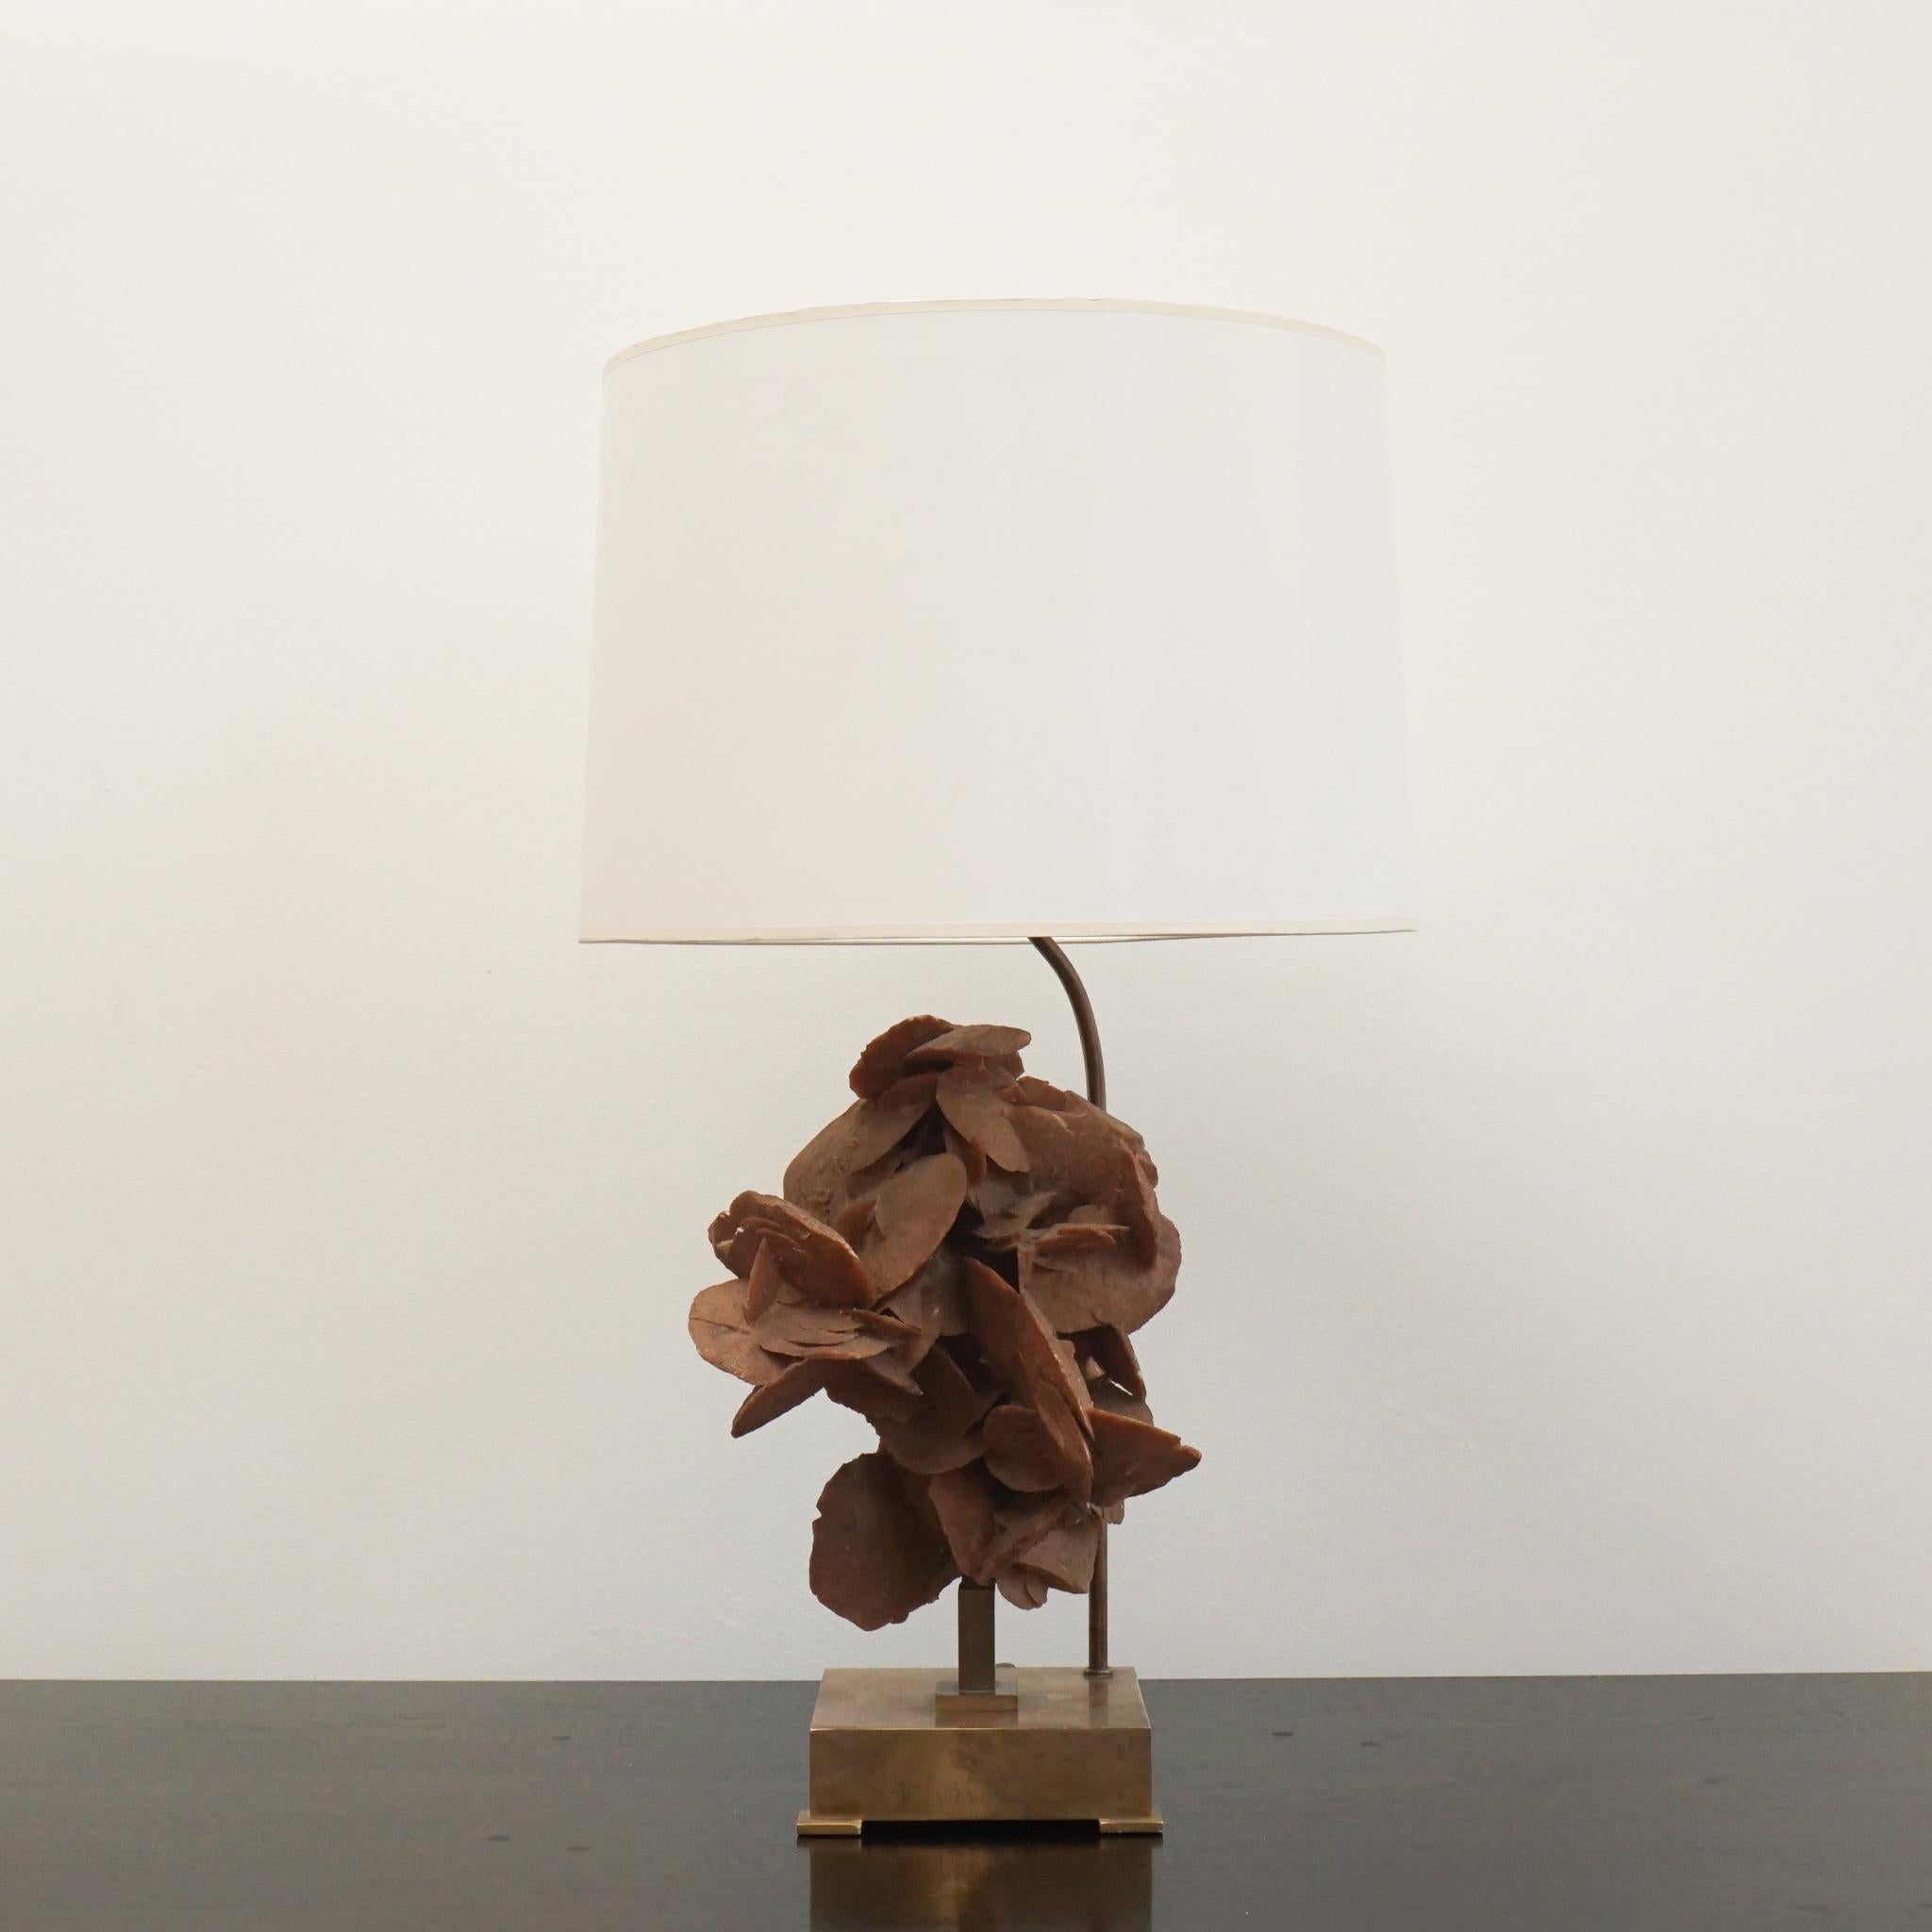 This 1970s Sandstone and brass table lamp is a rare find. Created by Belgium designer Willy Daro, it features a sandstone bloom on a small footed brass base. Topped with a crisp white drum shade, the lamp is sculptural, functional and representative